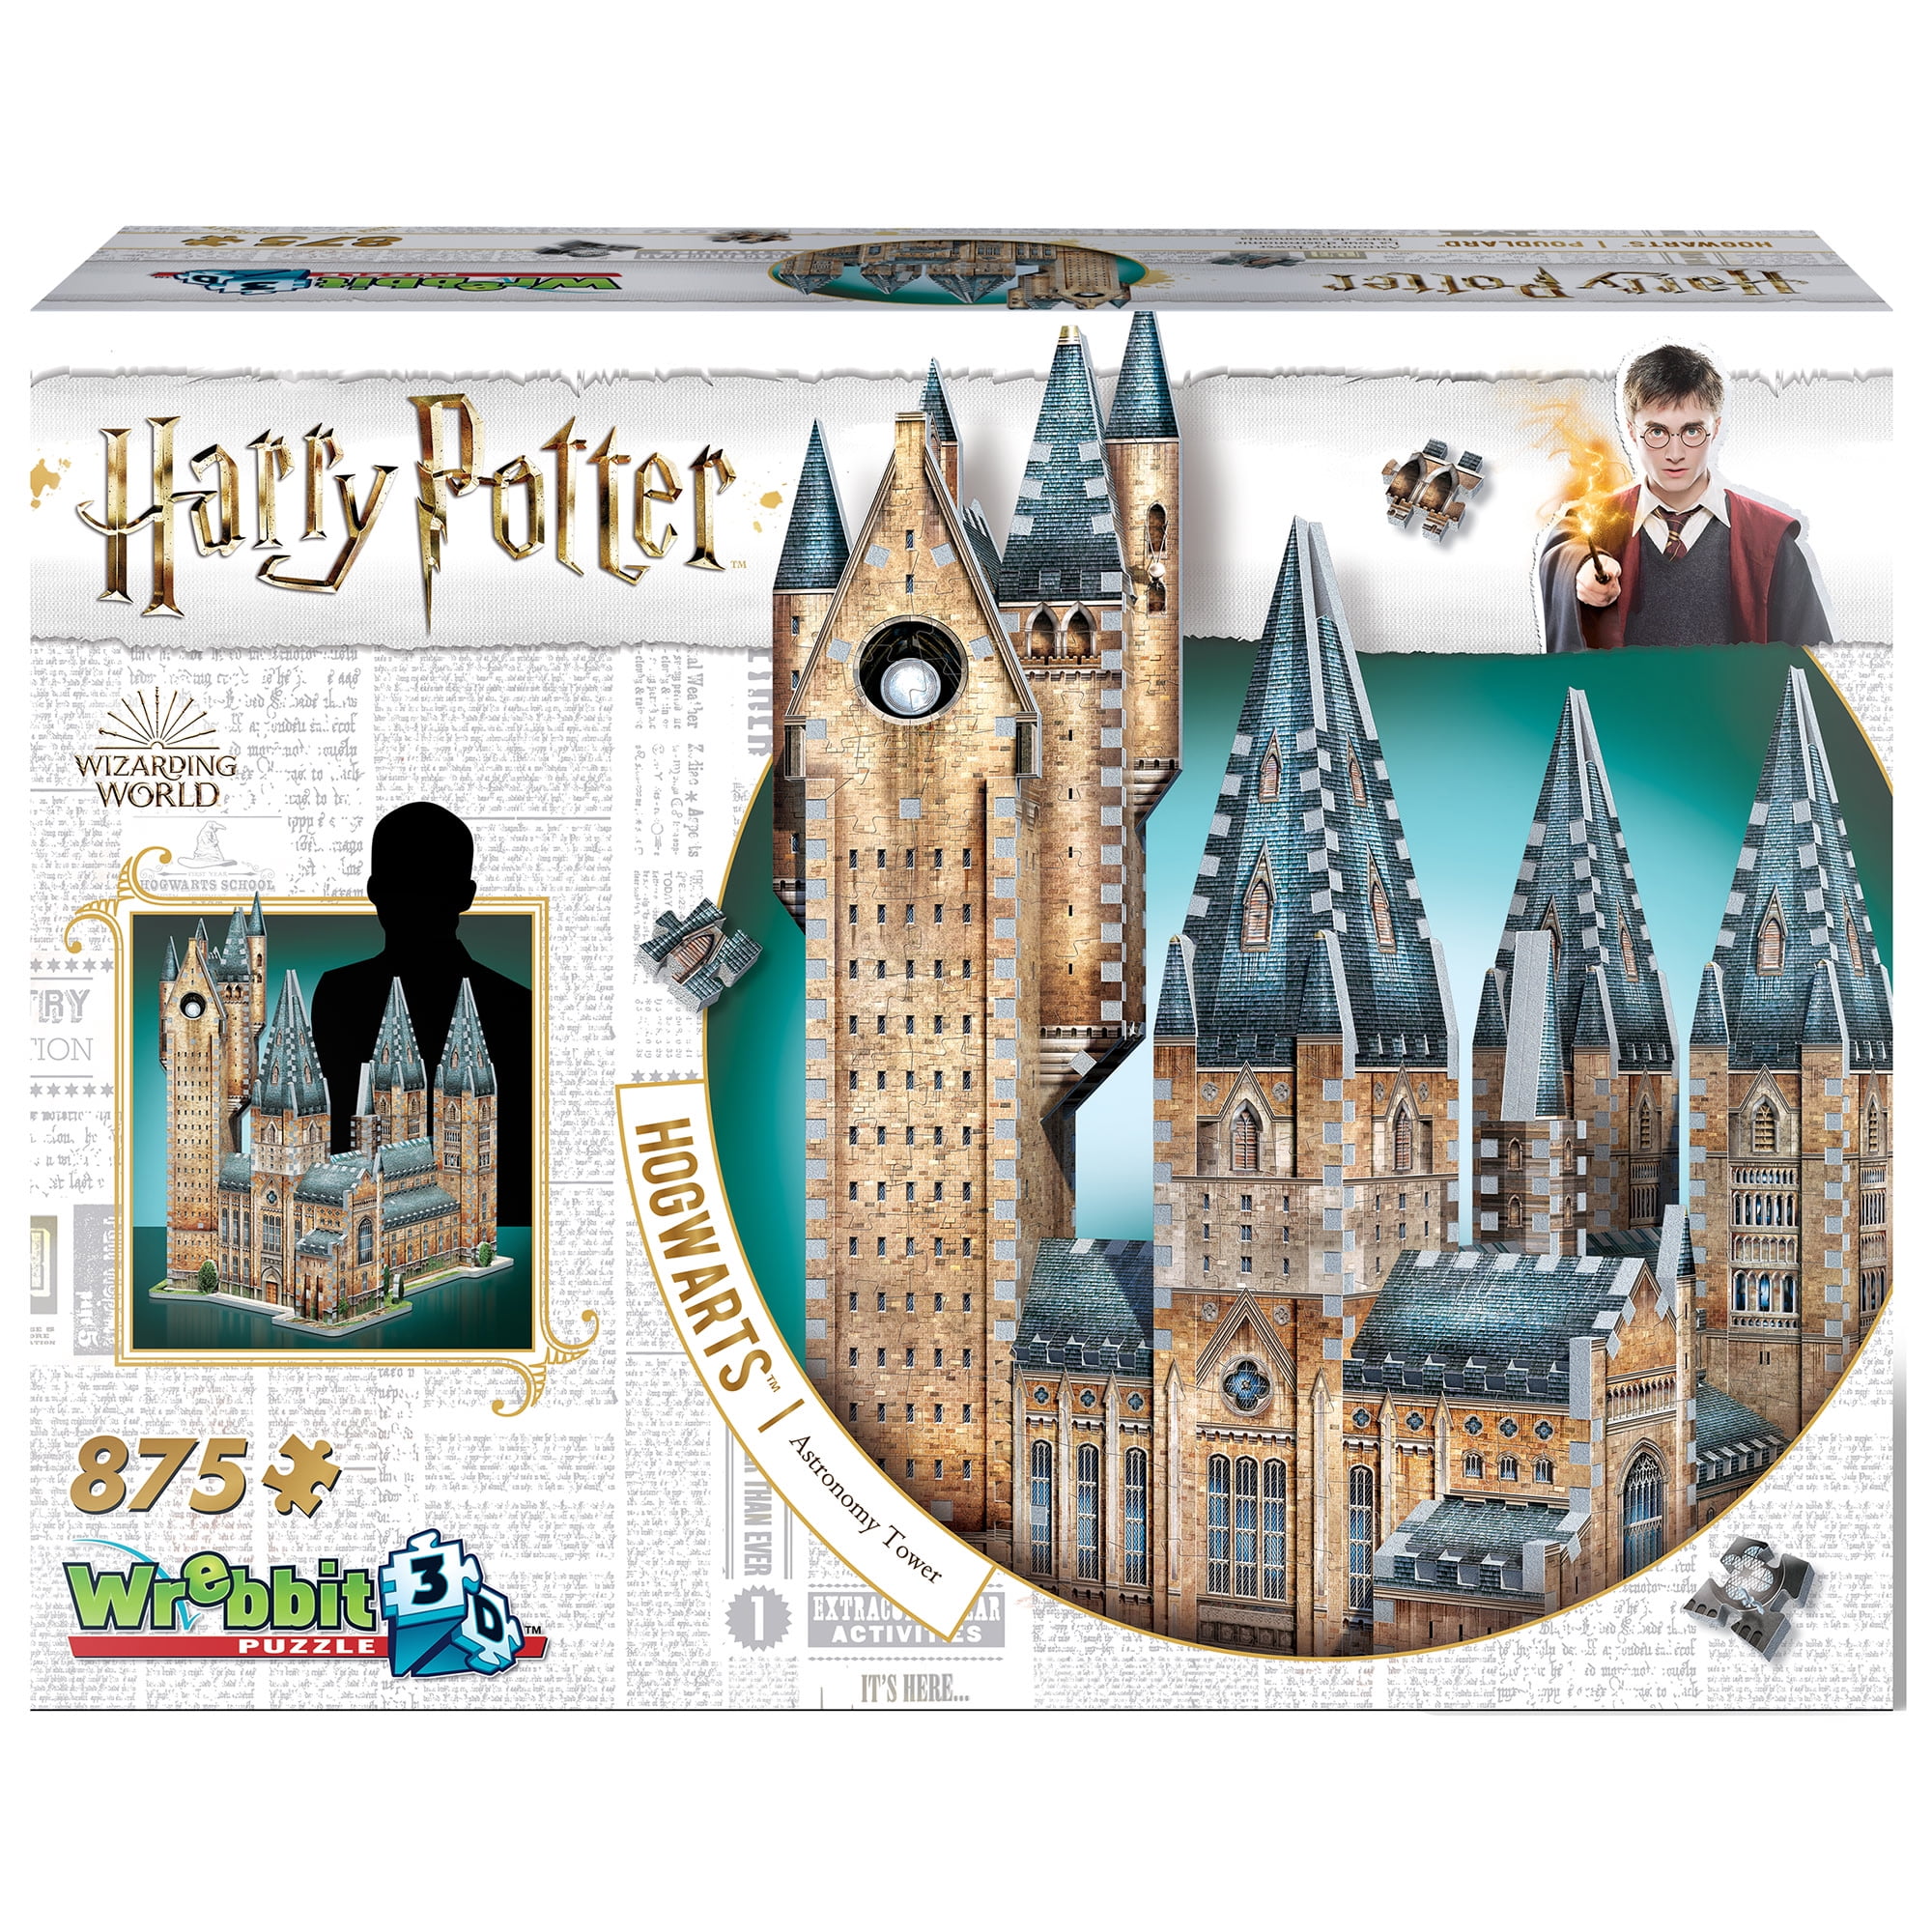 Harry Potter 3D Puzzle Hogwarts Castle Wizarding World 428 Pieces New Great Gift 